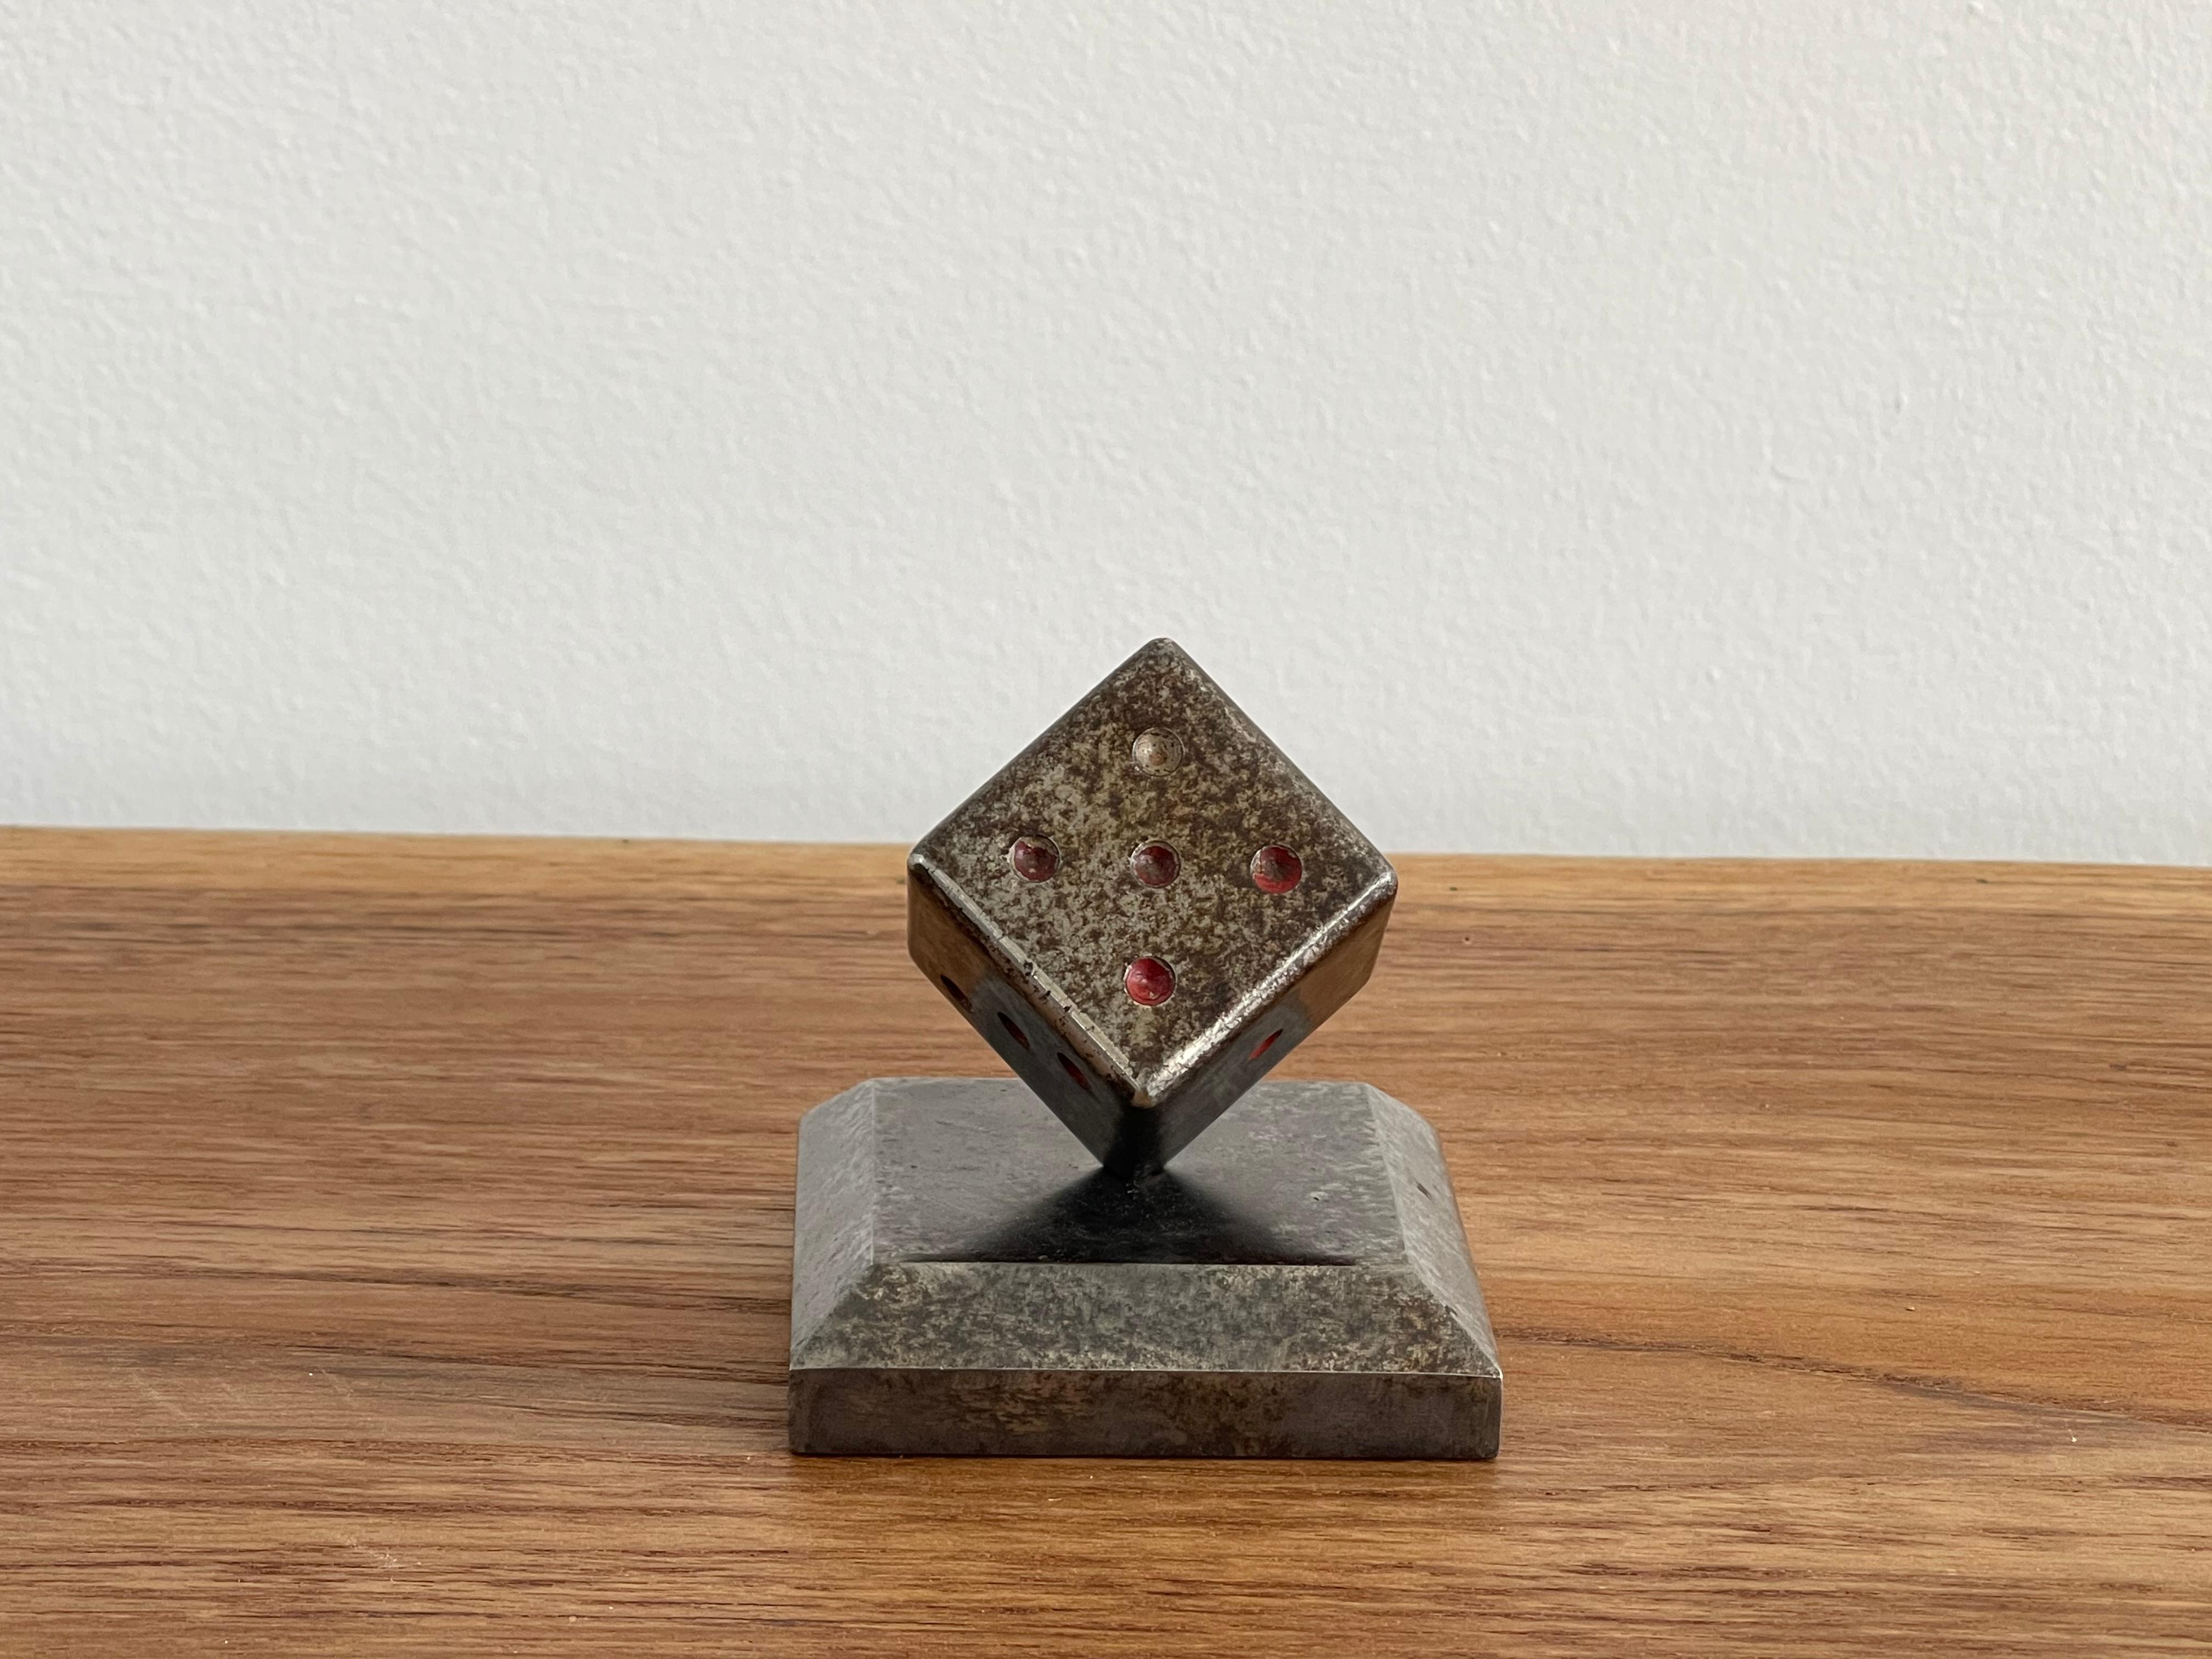 French Paperweight Dice Sculpture by Edgar Brandt